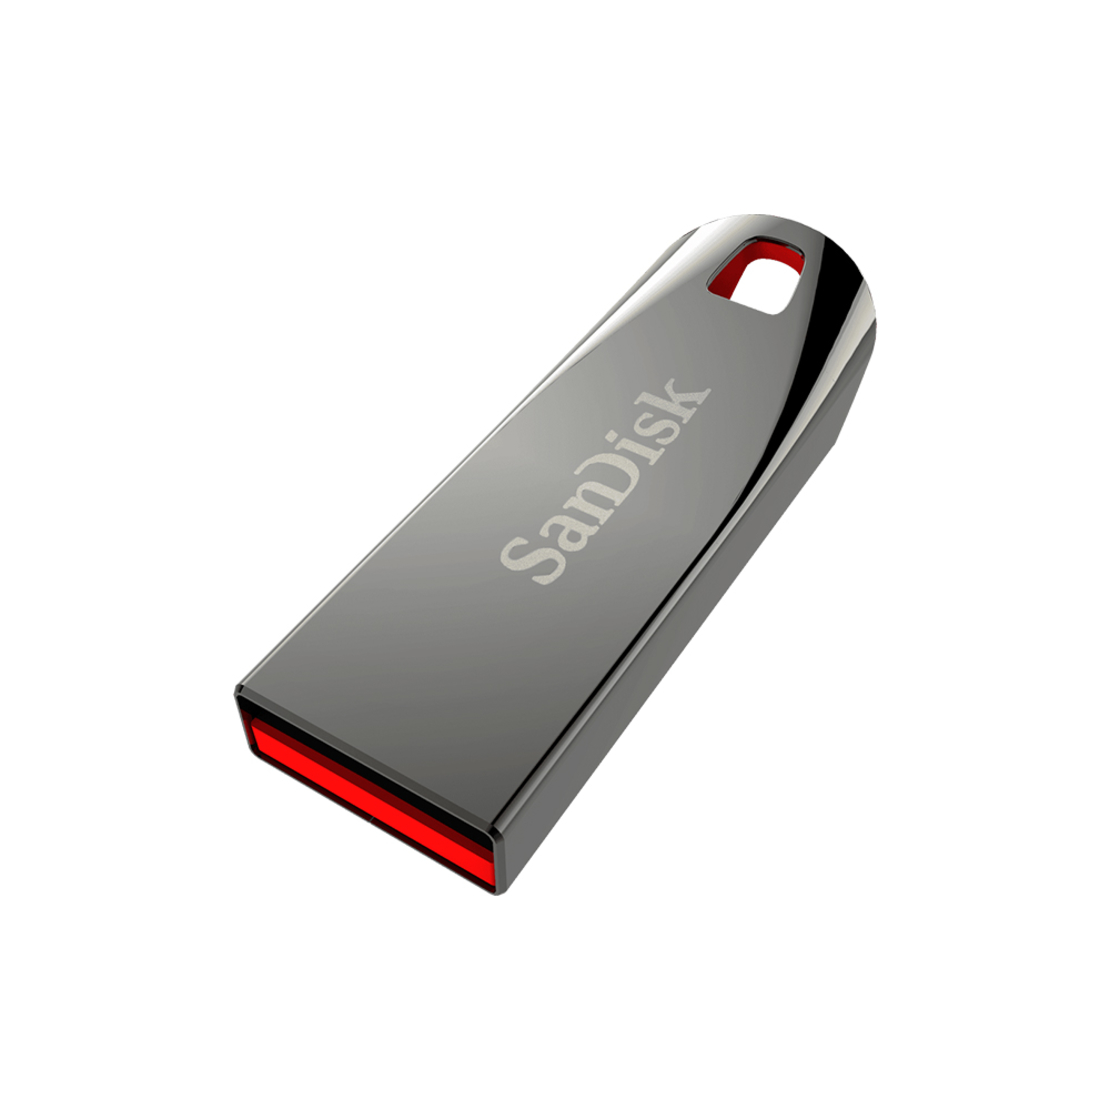 External device from SANDISK